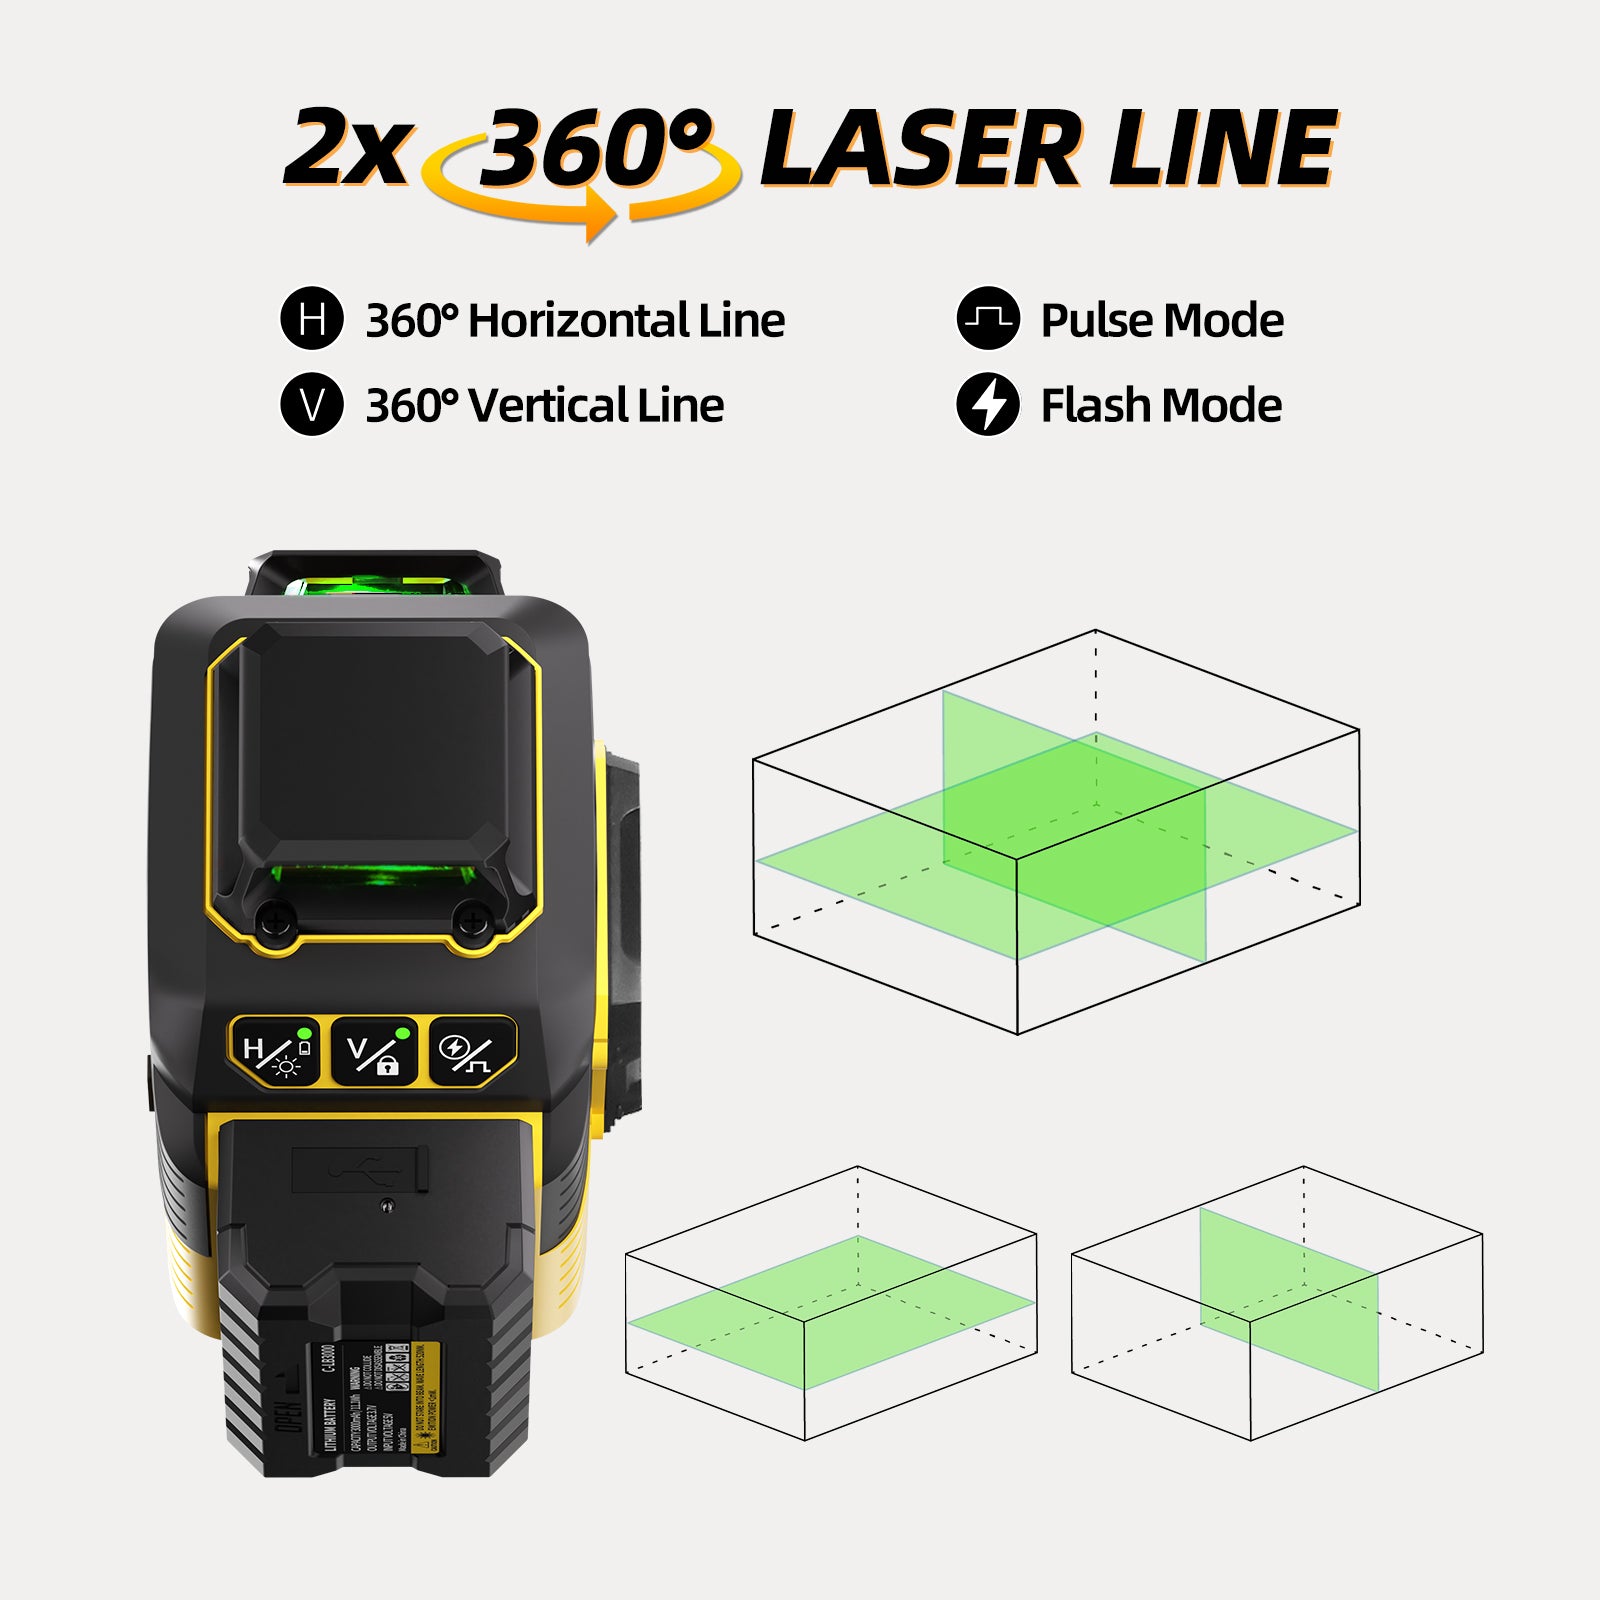 IKOVWUK Laser Level with Tripod, 2x360° Self-leveling Green Cross Line, 8 Lines Laser Level Tool with Rechargeable Battery & Type-C Charging Port, Compact Adjustable 1.6M Tripod & Carry Pouch Included